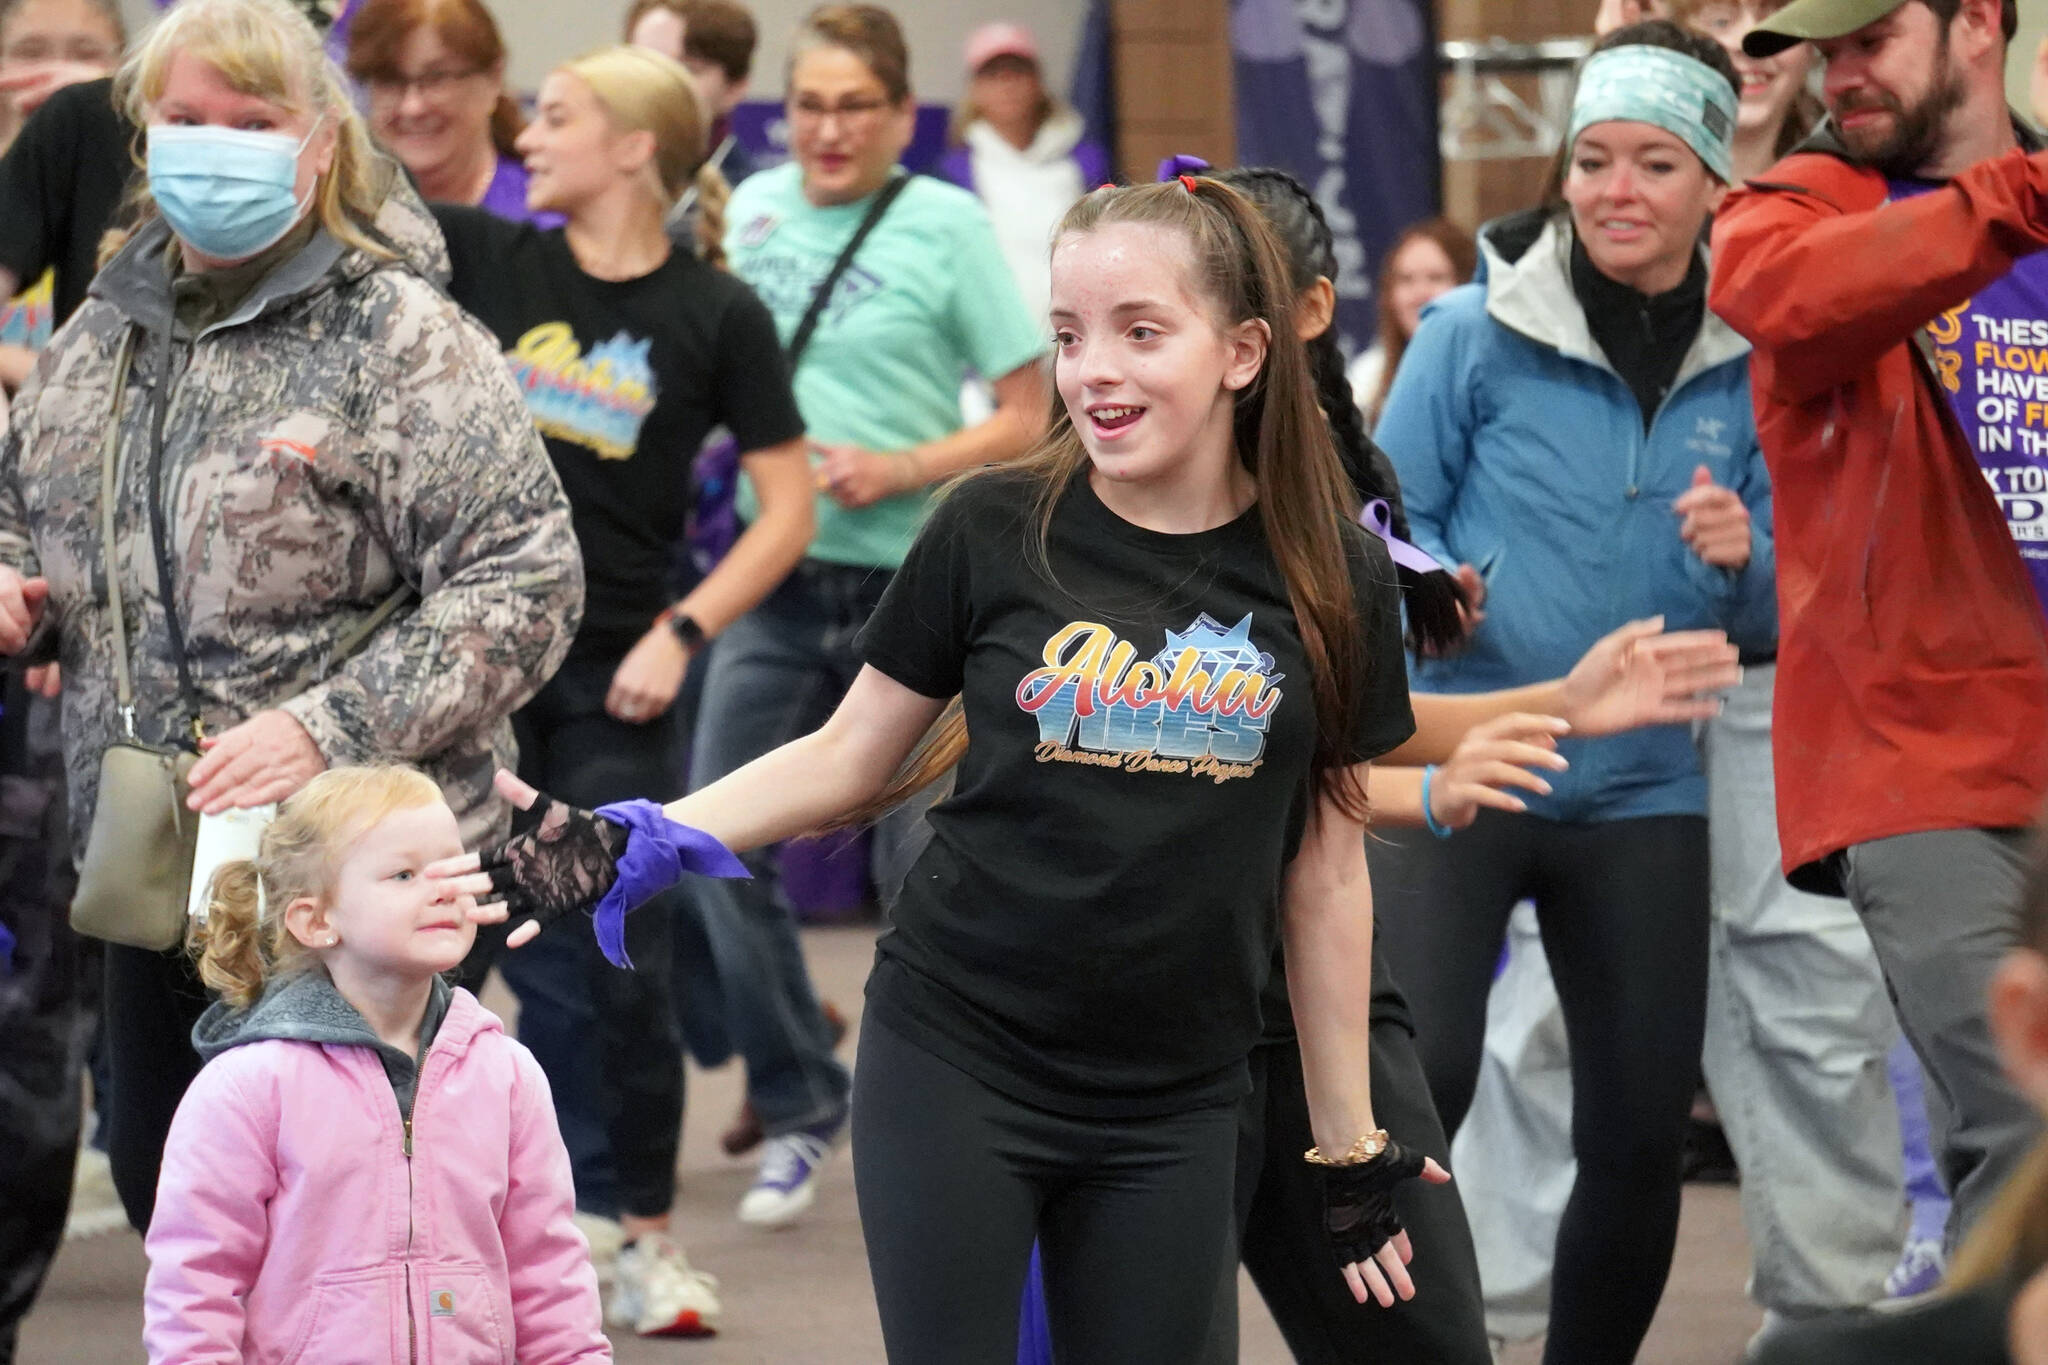 Dancers from the Diamond Dance Project perform ahead of the Walk to End Alzheimer’s at the Soldotna Regional Sports Complex in Soldotna, Alaska, on Saturday, Sept. 16, 2023. (Jake Dye/Peninsula Clarion)